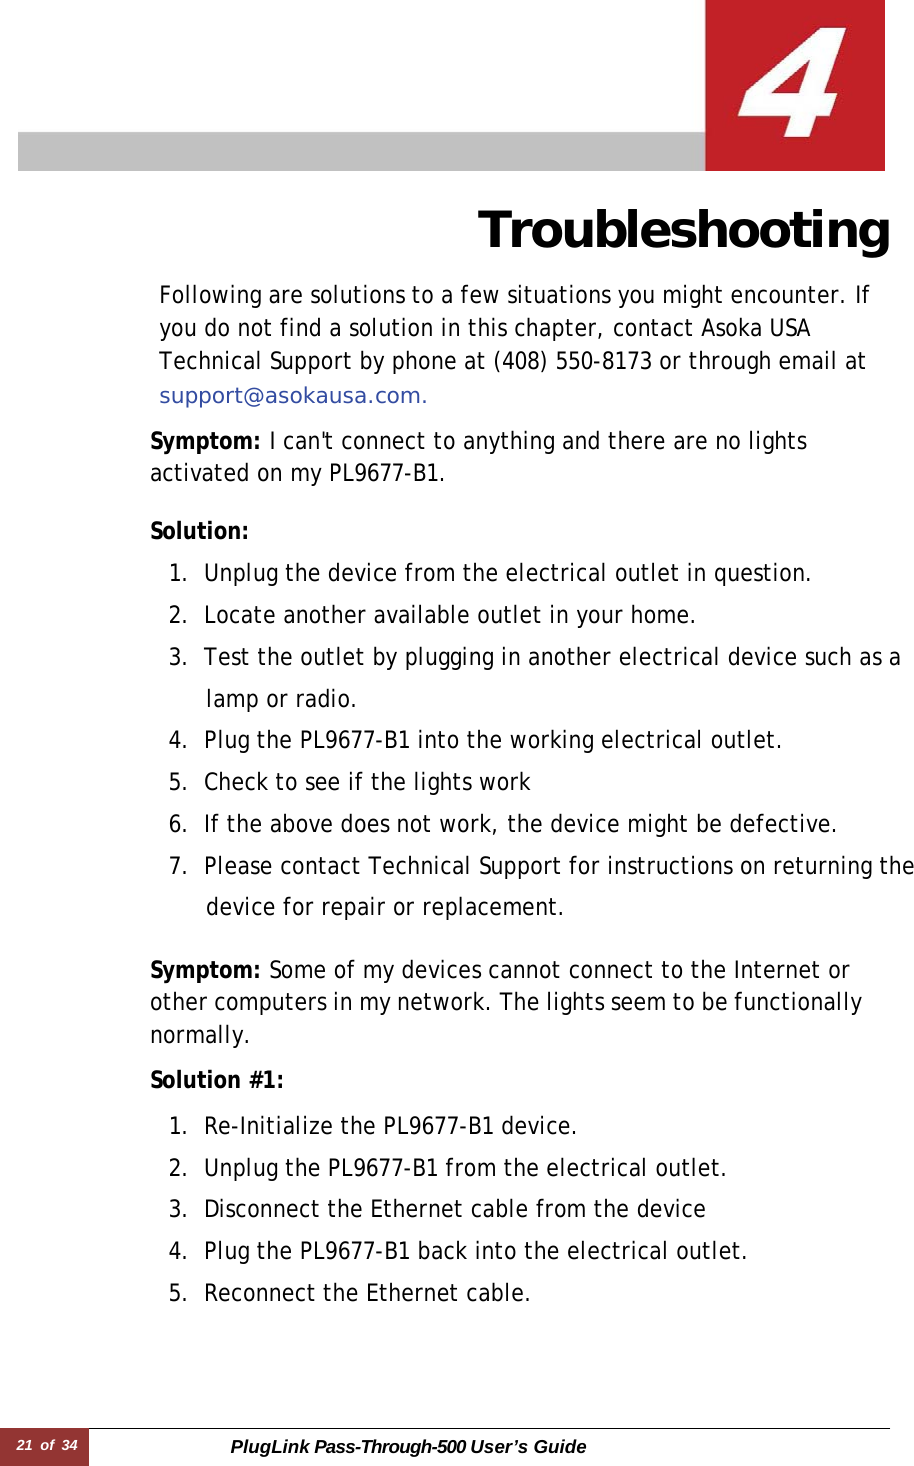 21 of 34 PlugLink Pass-Through-500 User’s Guide    Troubleshooting  Following are solutions to a few situations you might encounter. If you do not find a solution in this chapter, contact Asoka USA Technical Support by phone at (408) 550-8173 or through email at support@asokausa.com.  Symptom: I can&apos;t connect to anything and there are no lights activated on my PL9677-B1.  Solution:  1. Unplug the device from the electrical outlet in question. 2. Locate another available outlet in your home. 3. Test the outlet by plugging in another electrical device such as a lamp or radio. 4. Plug the PL9677-B1 into the working electrical outlet. 5. Check to see if the lights work 6. If the above does not work, the device might be defective. 7. Please contact Technical Support for instructions on returning the device for repair or replacement.  Symptom: Some of my devices cannot connect to the Internet or other computers in my network. The lights seem to be functionally normally.  Solution #1:  1. Re-Initialize the PL9677-B1 device. 2. Unplug the PL9677-B1 from the electrical outlet. 3. Disconnect the Ethernet cable from the device 4. Plug the PL9677-B1 back into the electrical outlet. 5. Reconnect the Ethernet cable. 